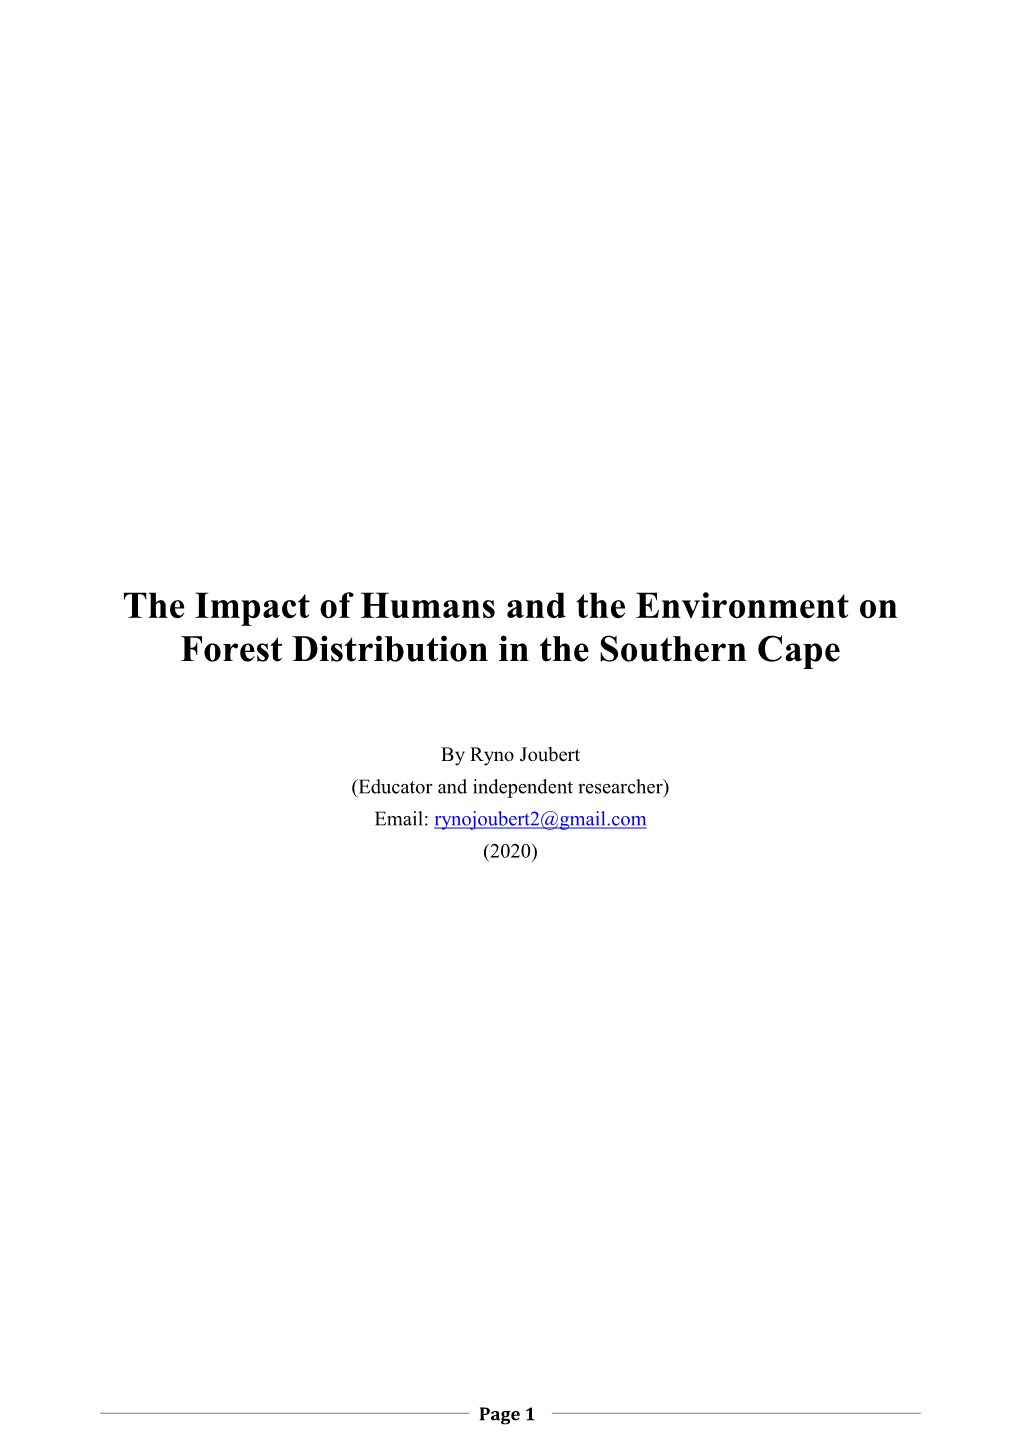 The Impact of Humans and the Environment on Forest Distribution in the Southern Cape